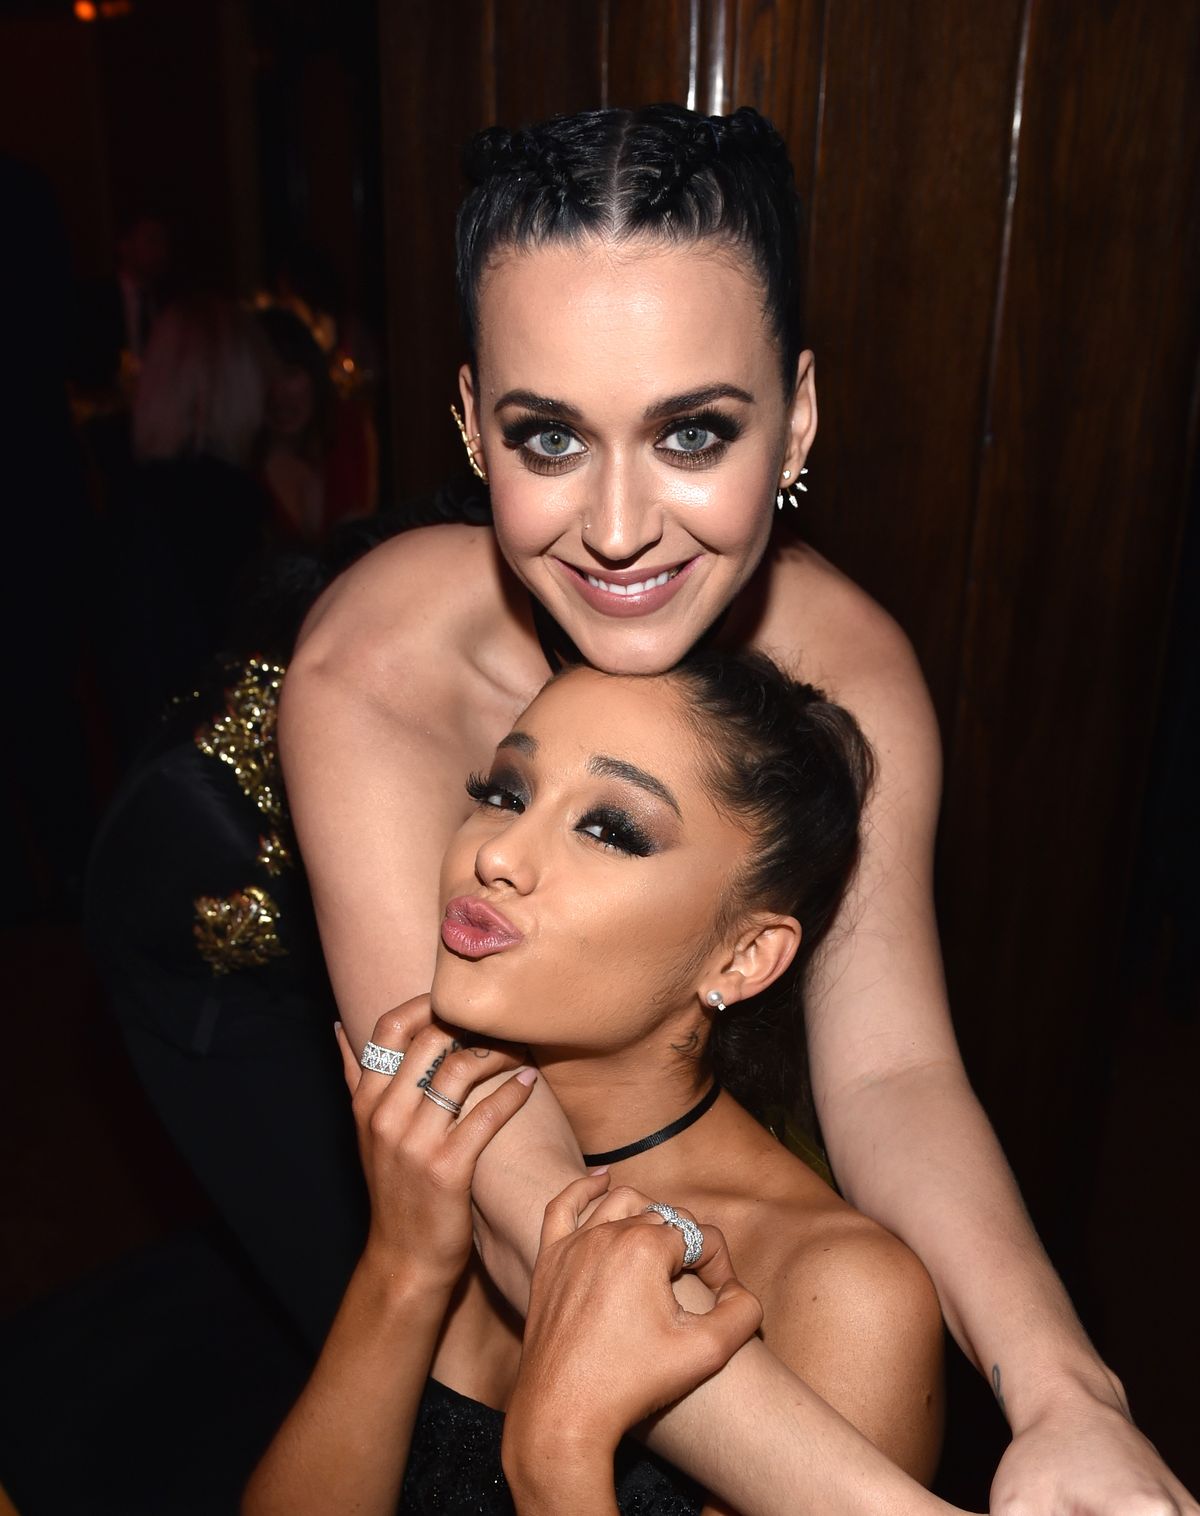 Ariana Grande Snuff Porn - Ariana Grande Paid For Katy Perry And Orlando Bloom's Sushi Dinner In A  'Boss Move'